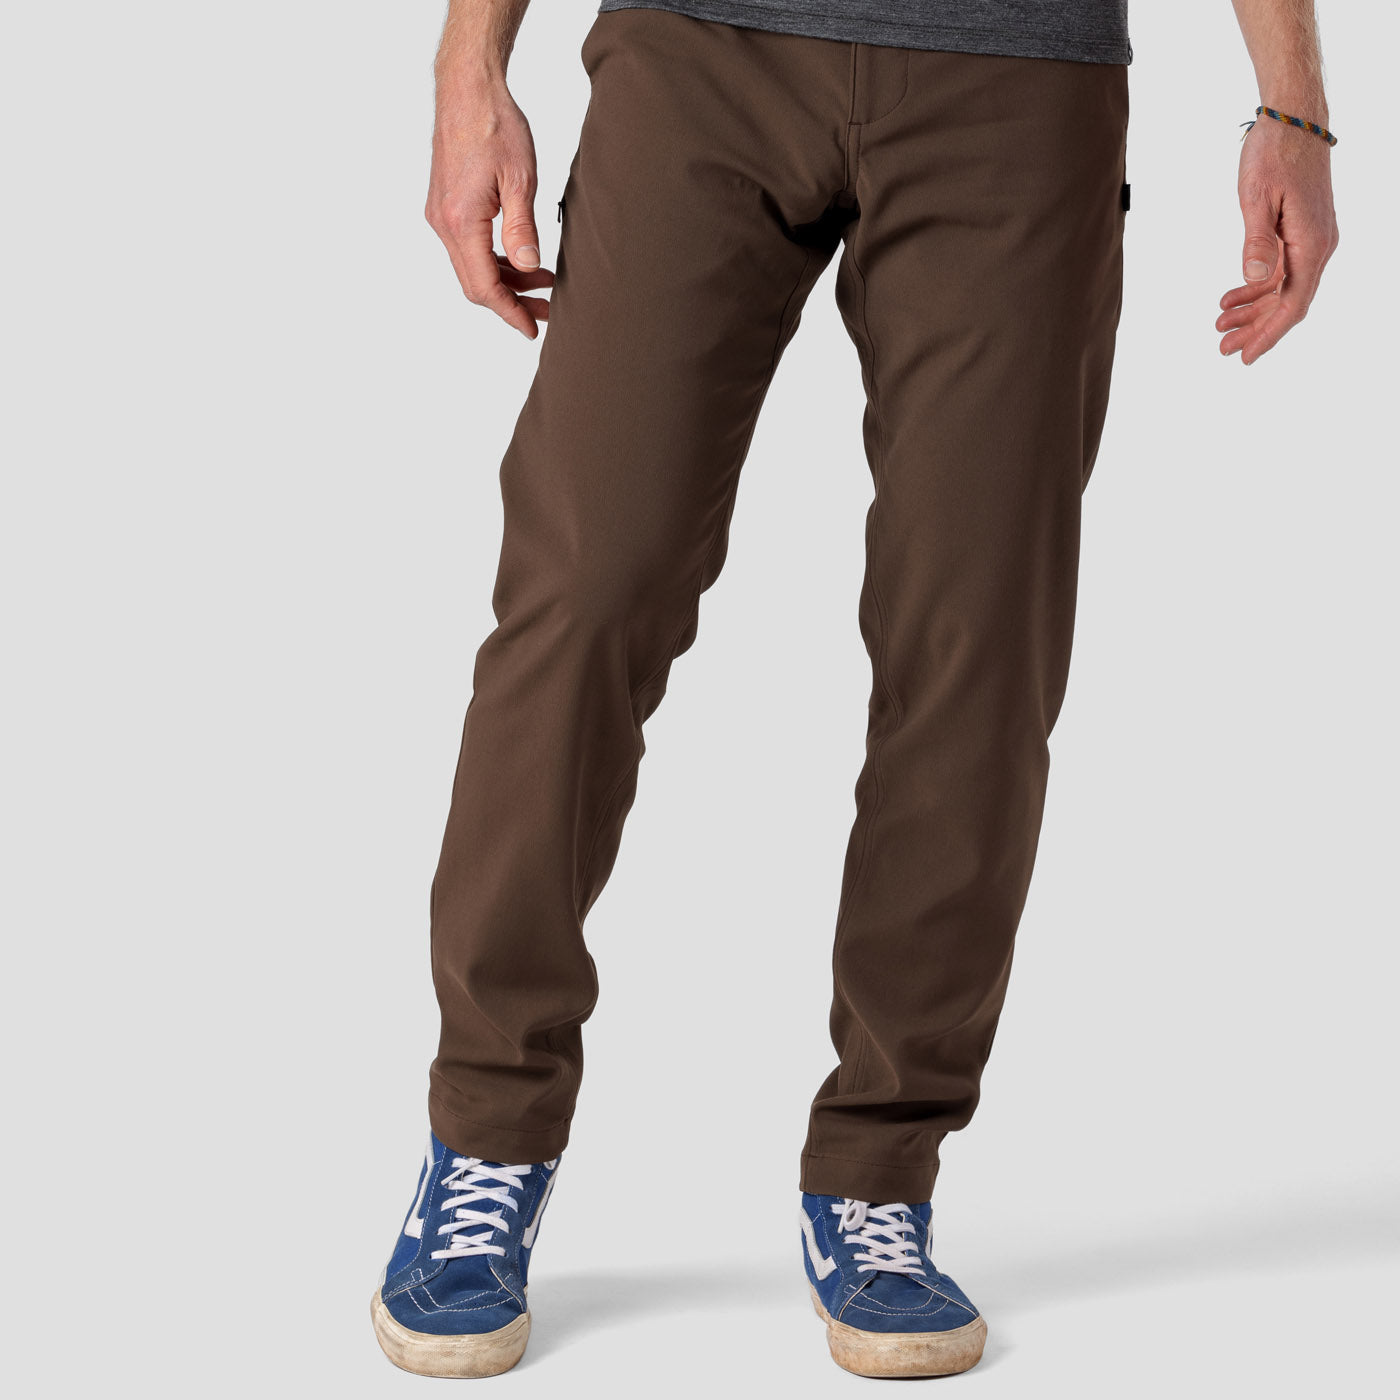 Men's Mission Pants - Coffee (Limited Sizes) – Ornot Online Store